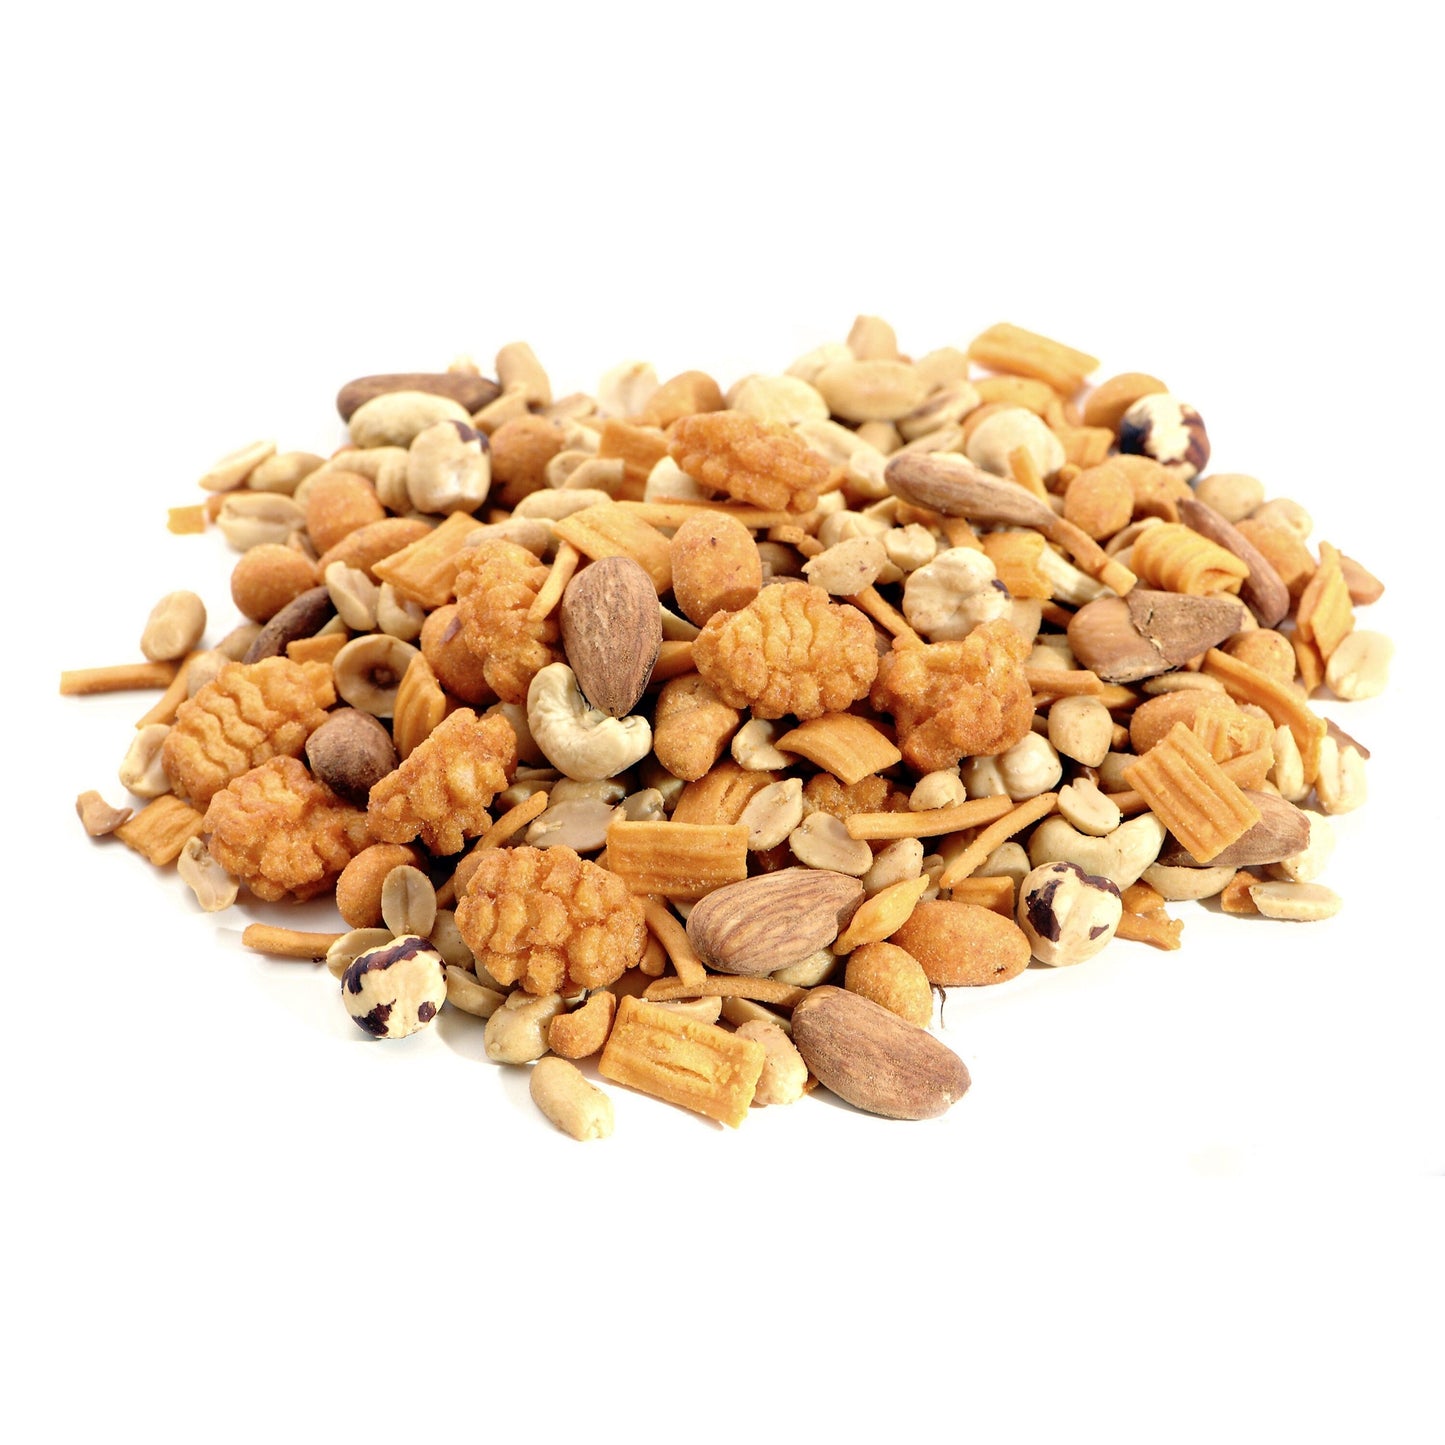 MIX NUTS SNACK